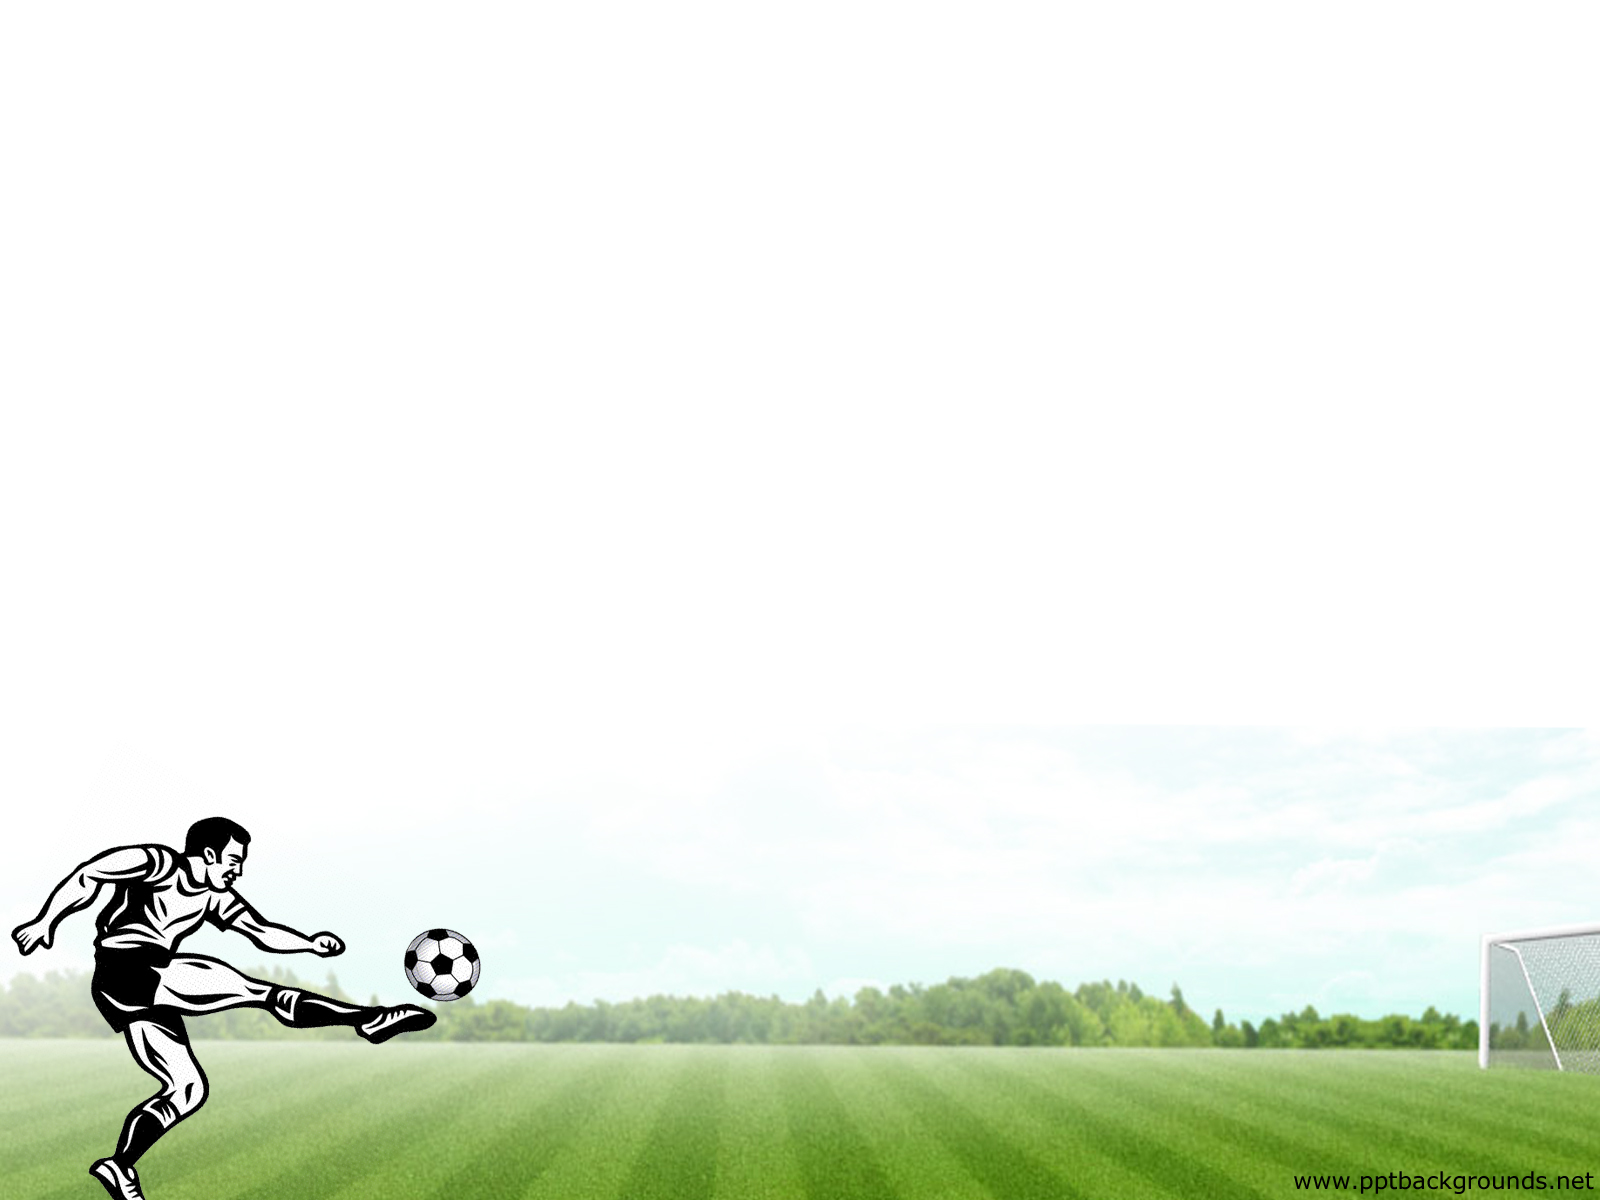 The Man Playing Football free powerpoint background